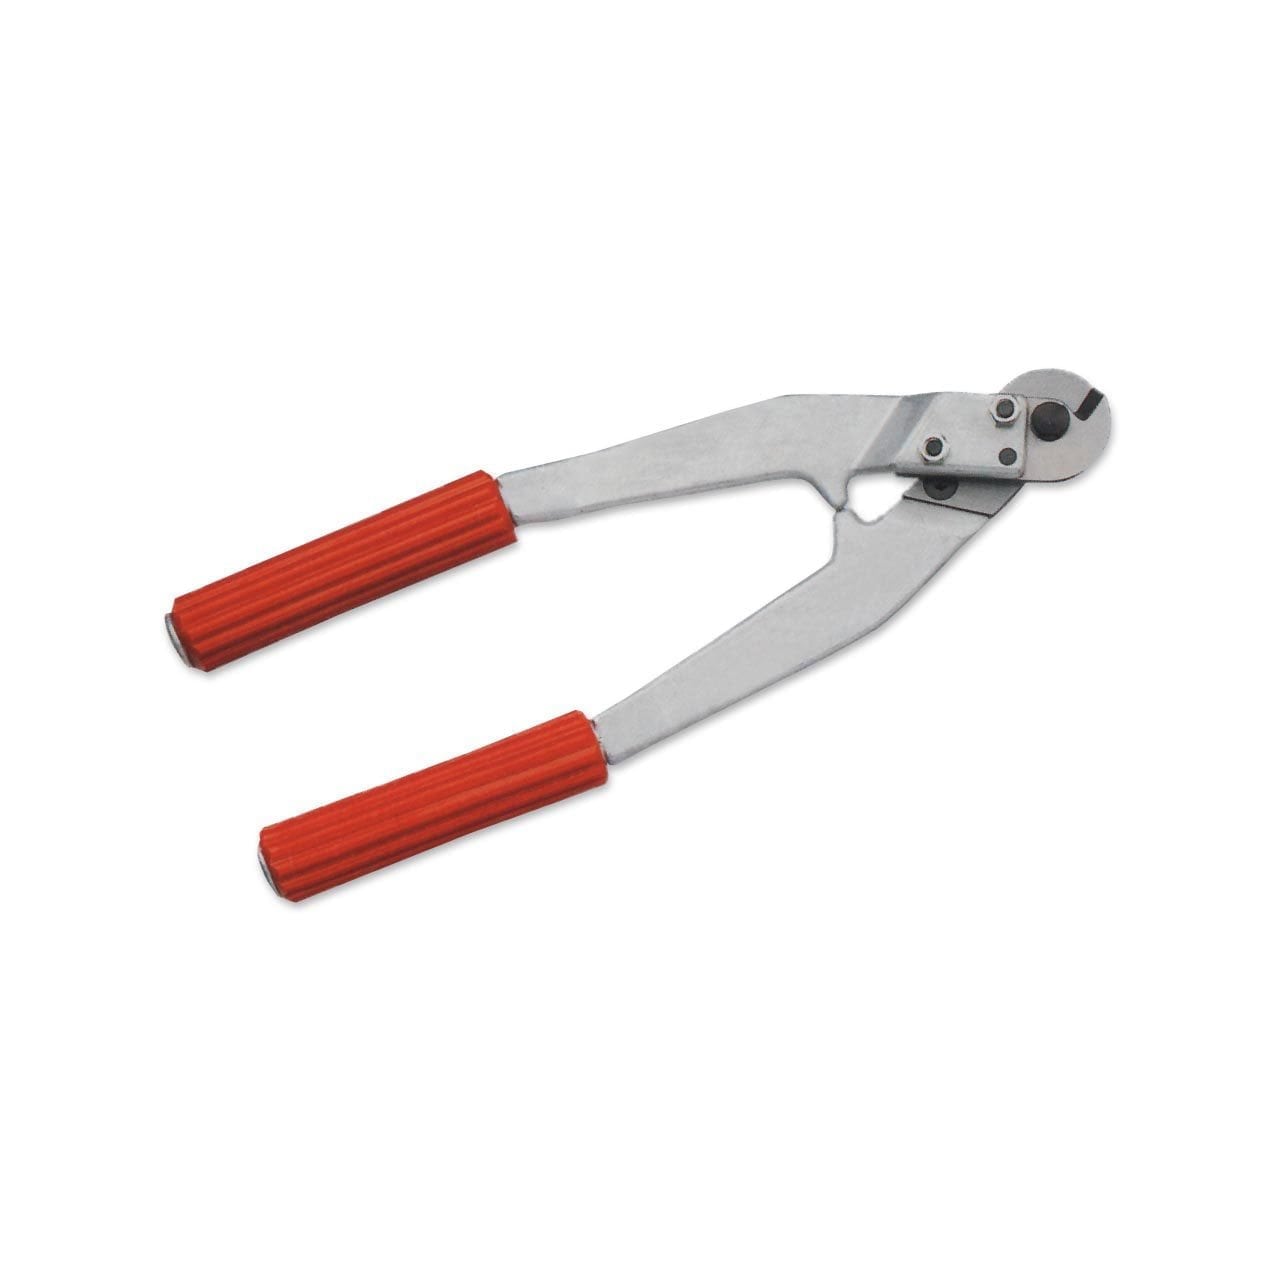 Wire rope cutter "No.9"